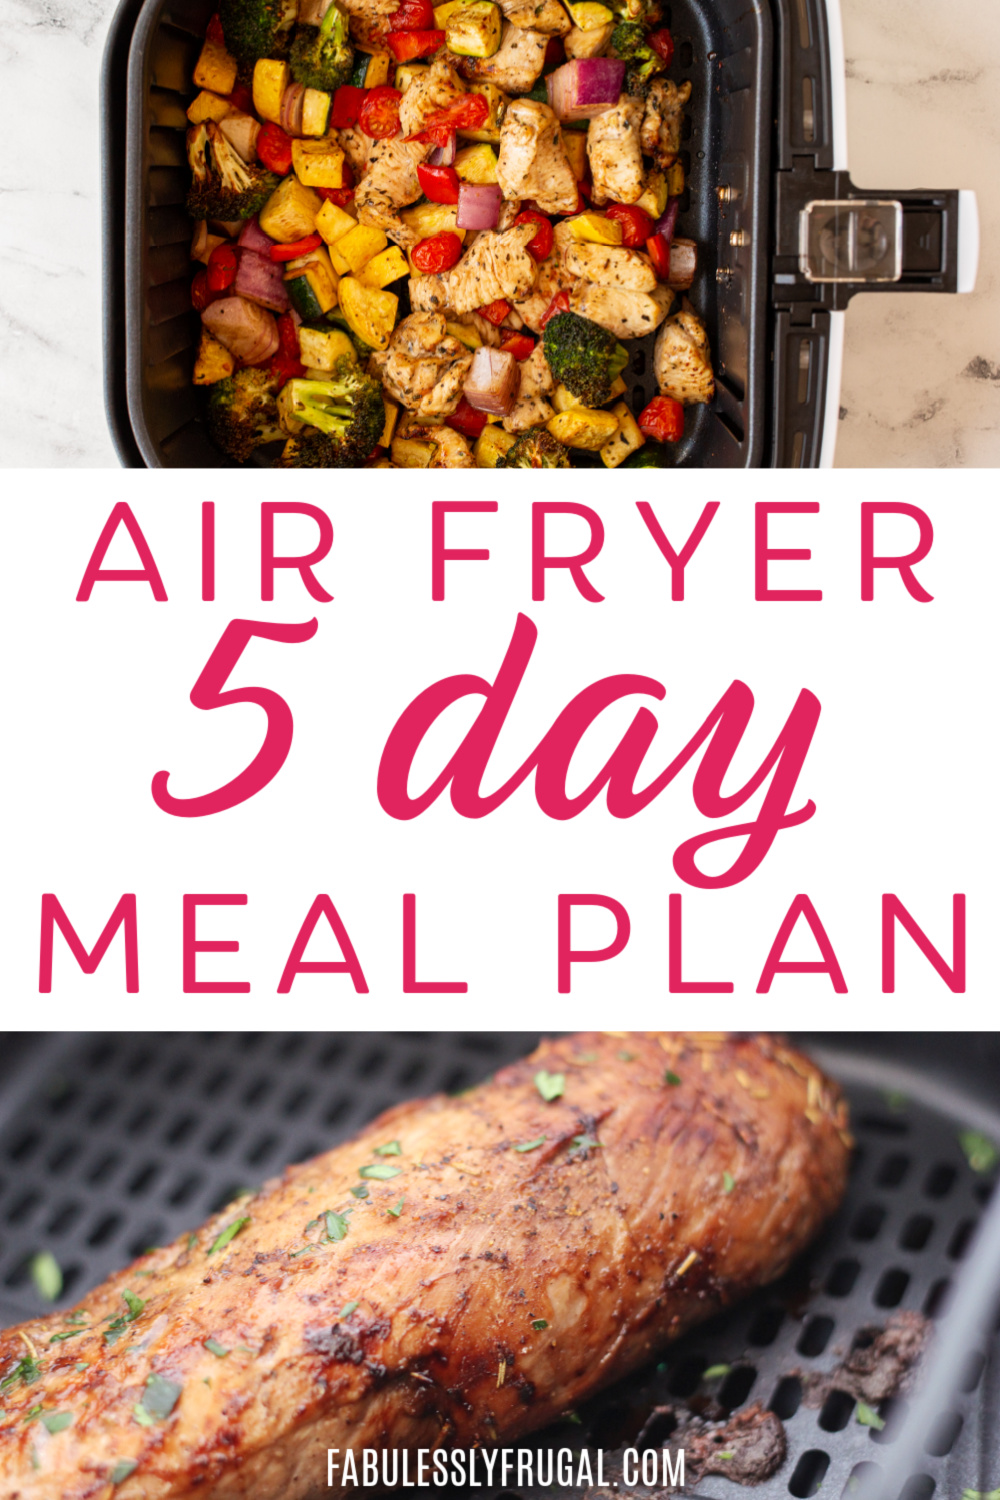 air fryer 5 day meal plan